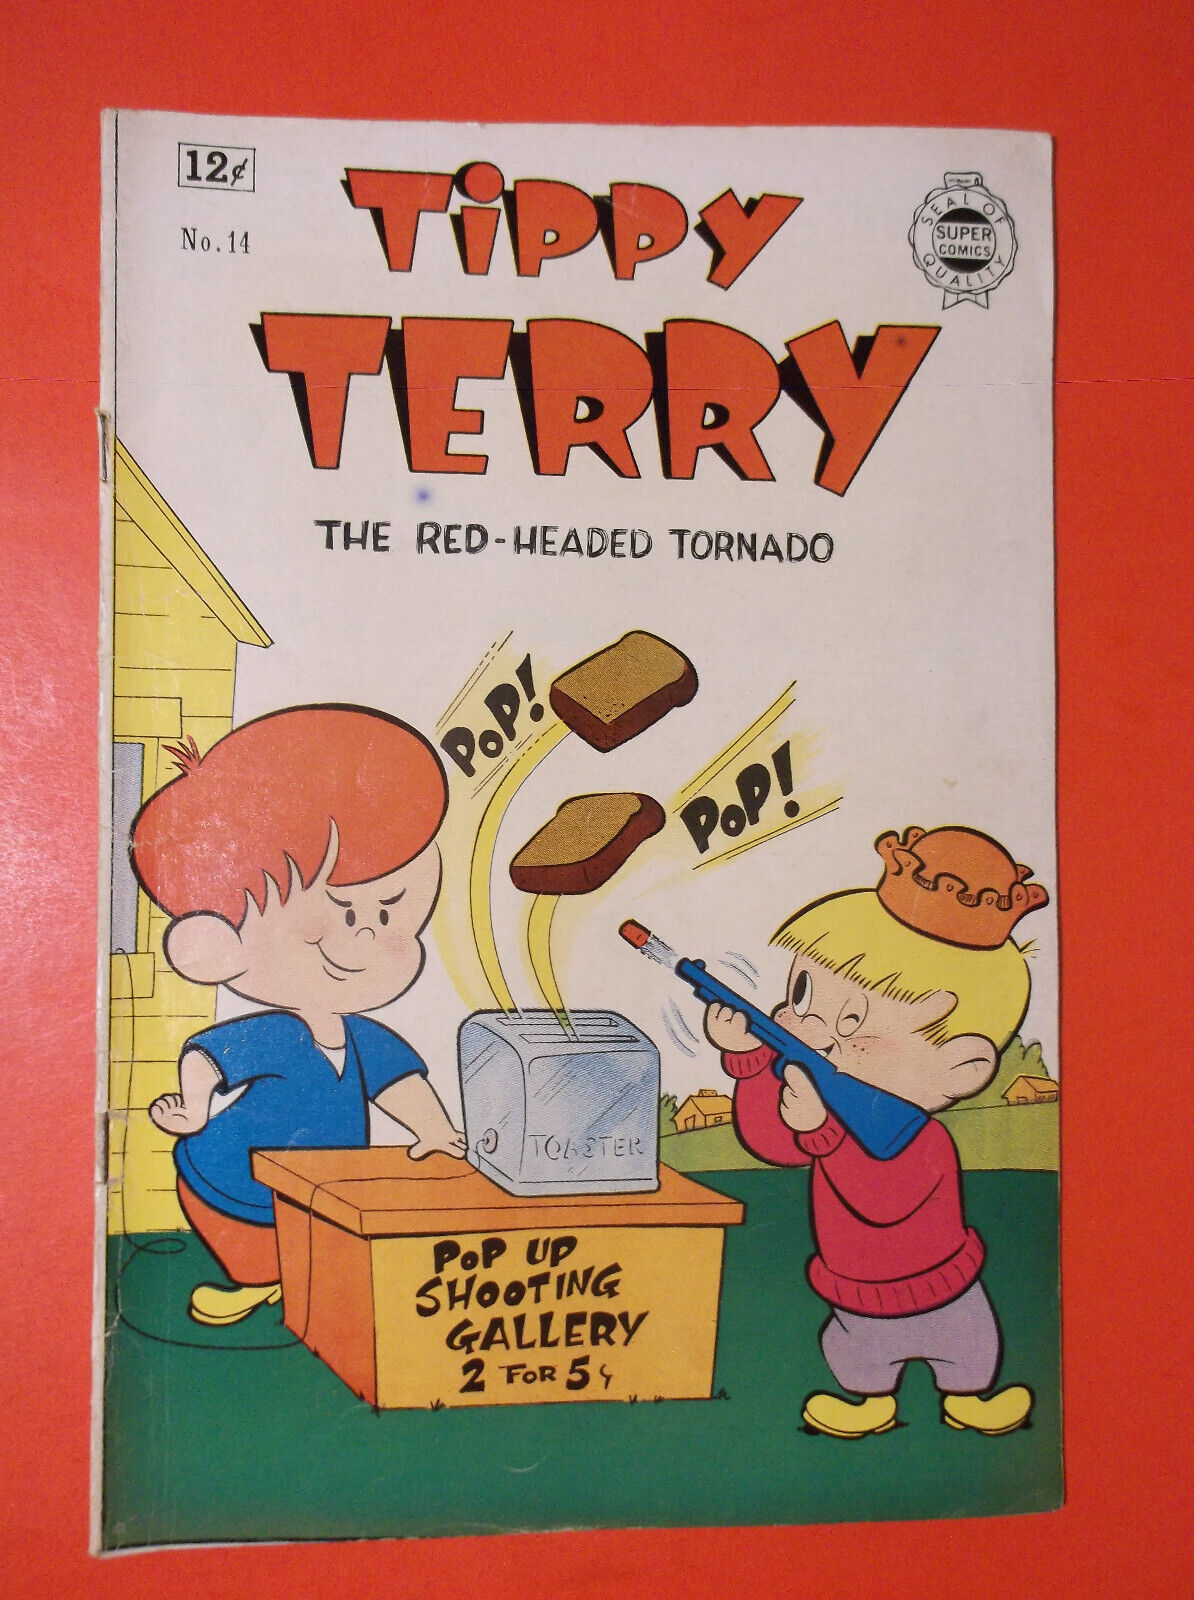 TIPPY TERRY # 14 - VG 4.0 - 1963 SUPER COMIC - THE RED-HEADED TORNADO